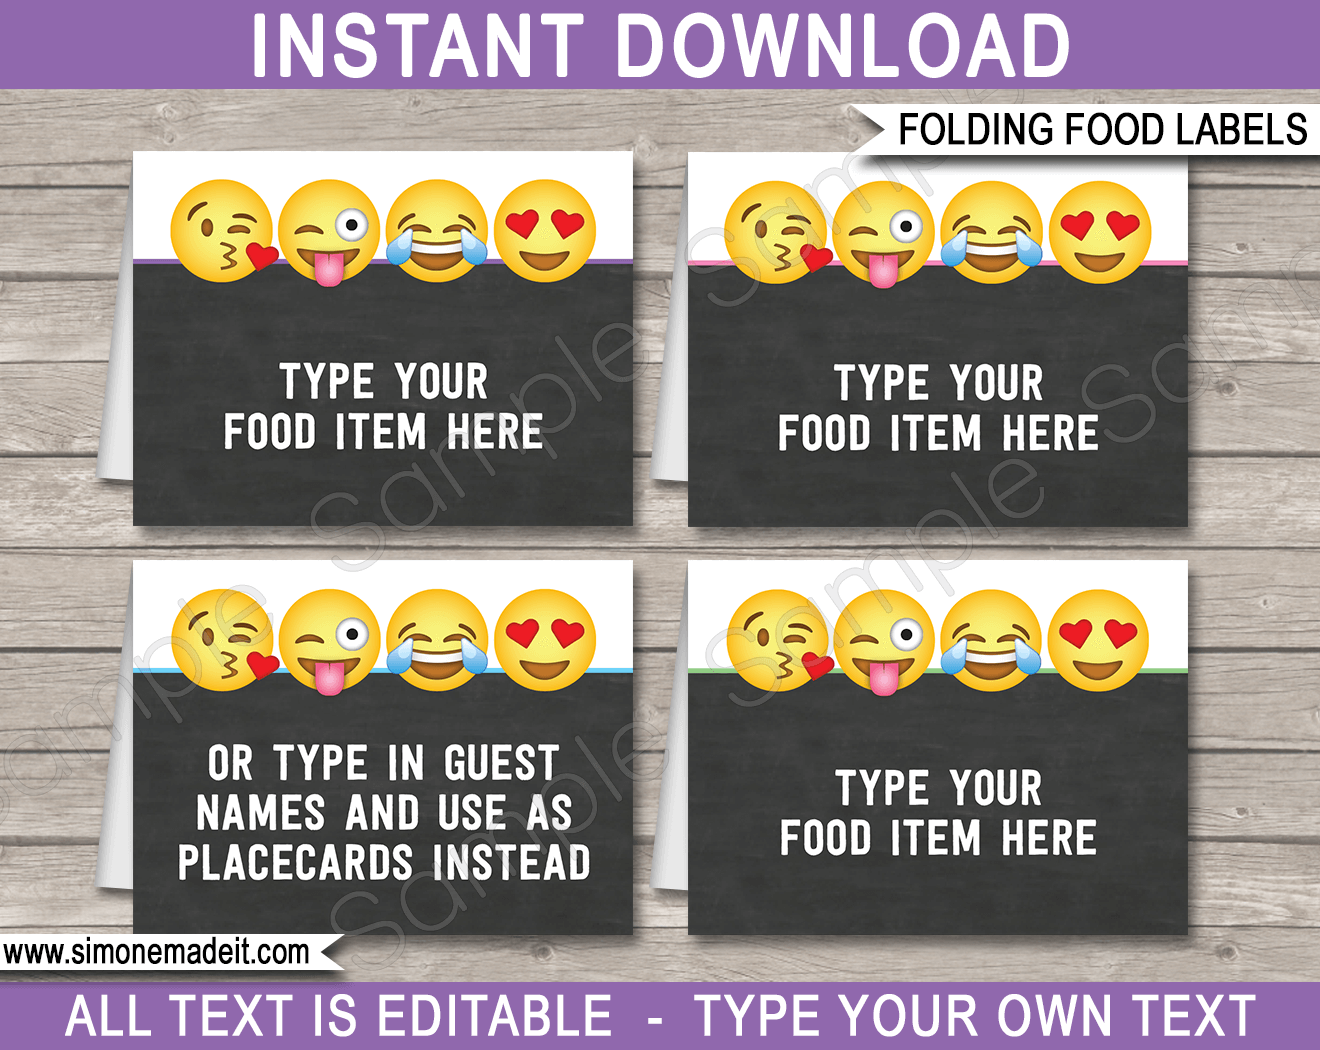 Emoji Party Food Labels template | Place Cards | Emoji Theme Birthday Party Decorations | DIY Editable & Printable template | INSTANT DOWNLOAD via simonemadeit.com